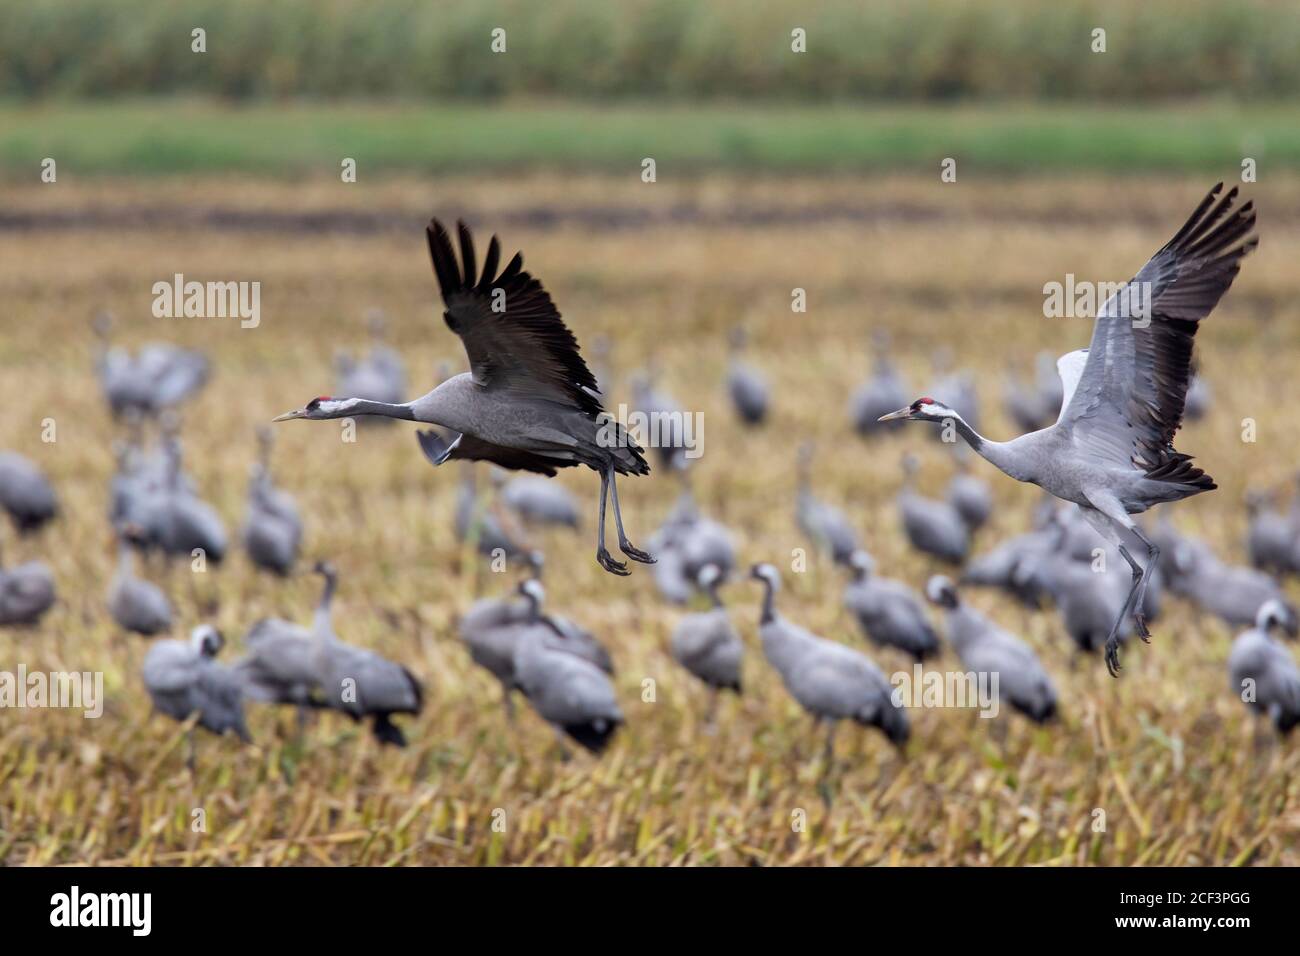 Flock of common cranes / Eurasian crane (Grus grus) group taking off from stubble field in autumn / fall, Mecklenburg-Western Pomerania, Germany Stock Photo